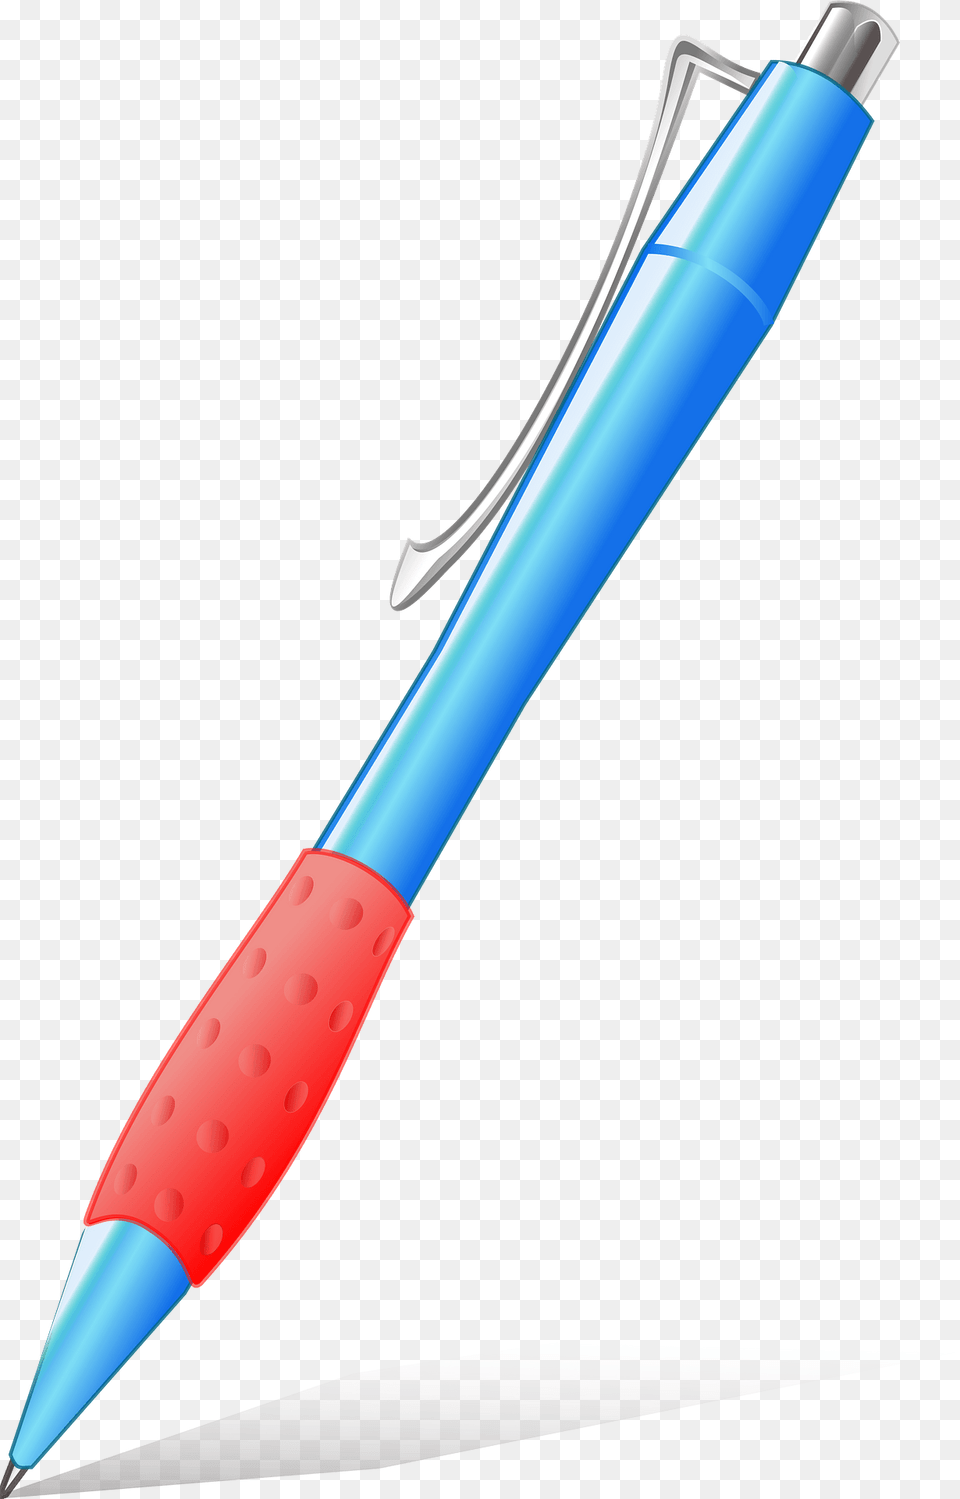 Blue Ink Pen With A Red Grip Clipart, Smoke Pipe Png Image